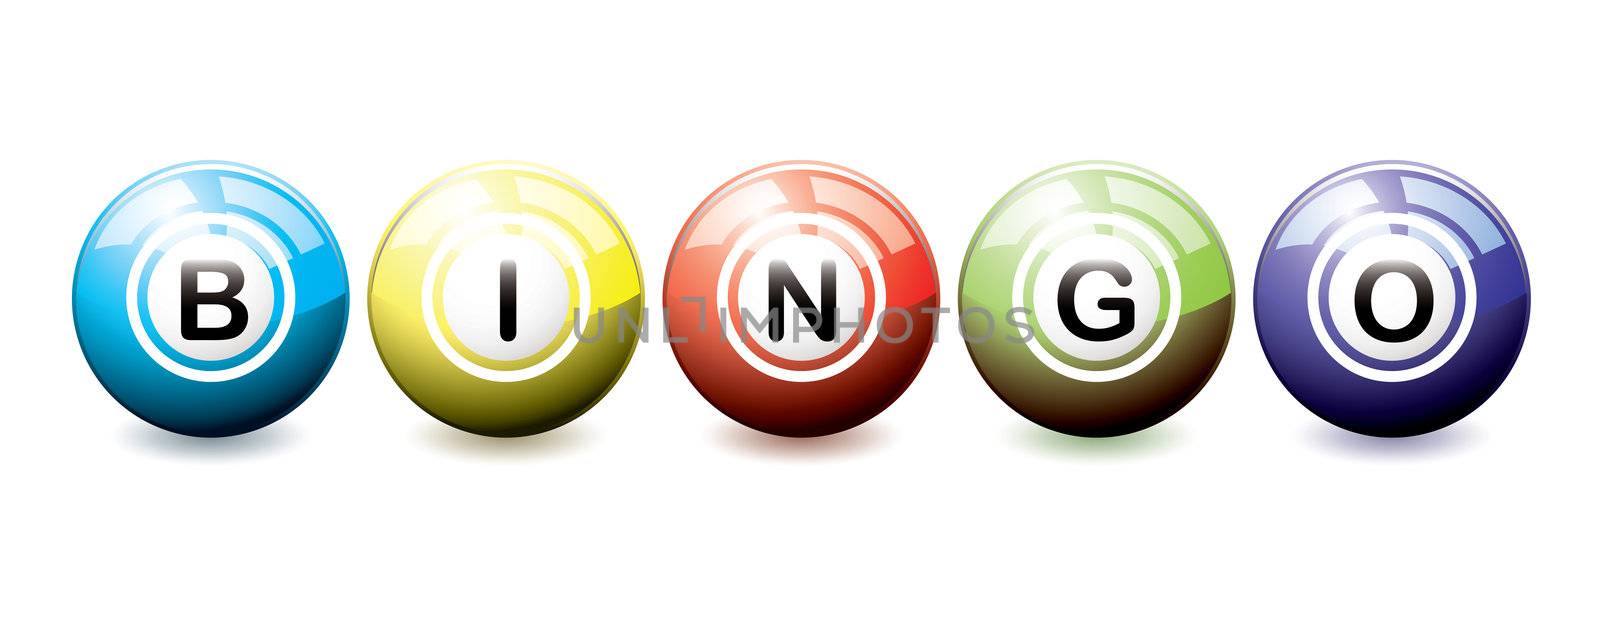 Brightly coloured bingo balls with light reflection